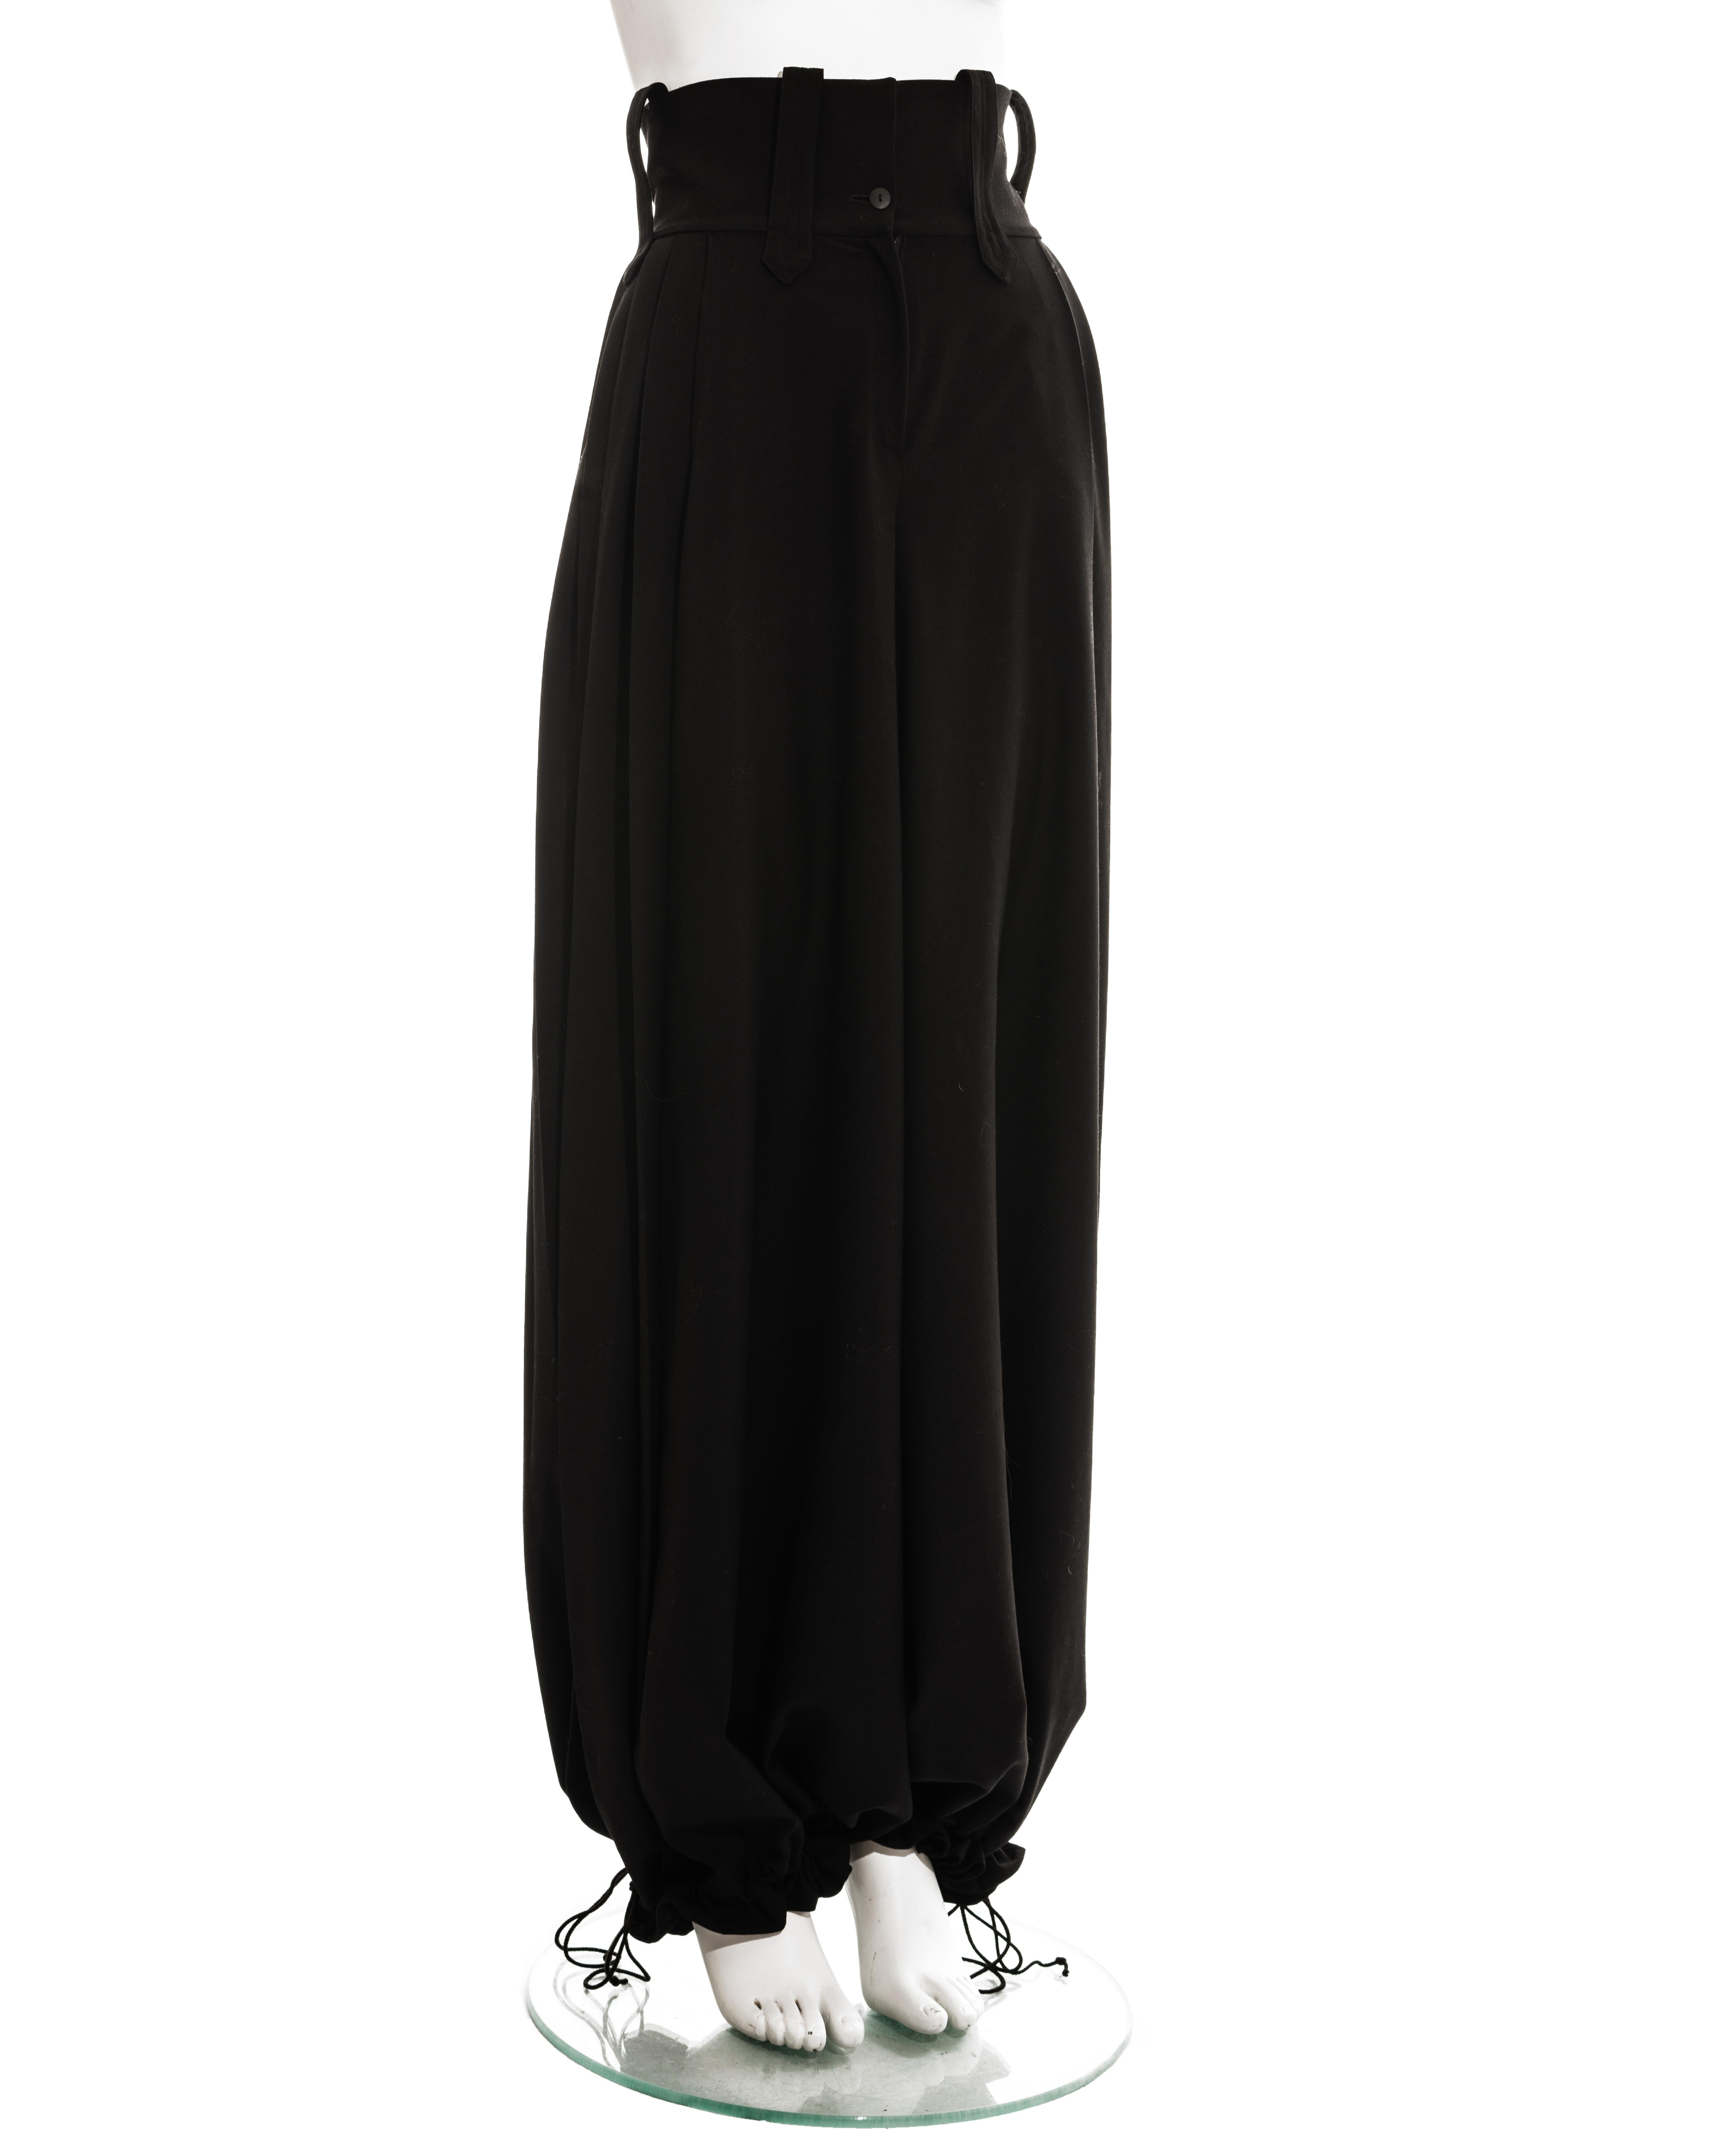 Christian Dior by John Galliano black wool wide leg haram pants with drawstring fastening on ankles and wide waist band.

Spring-Summer 1999